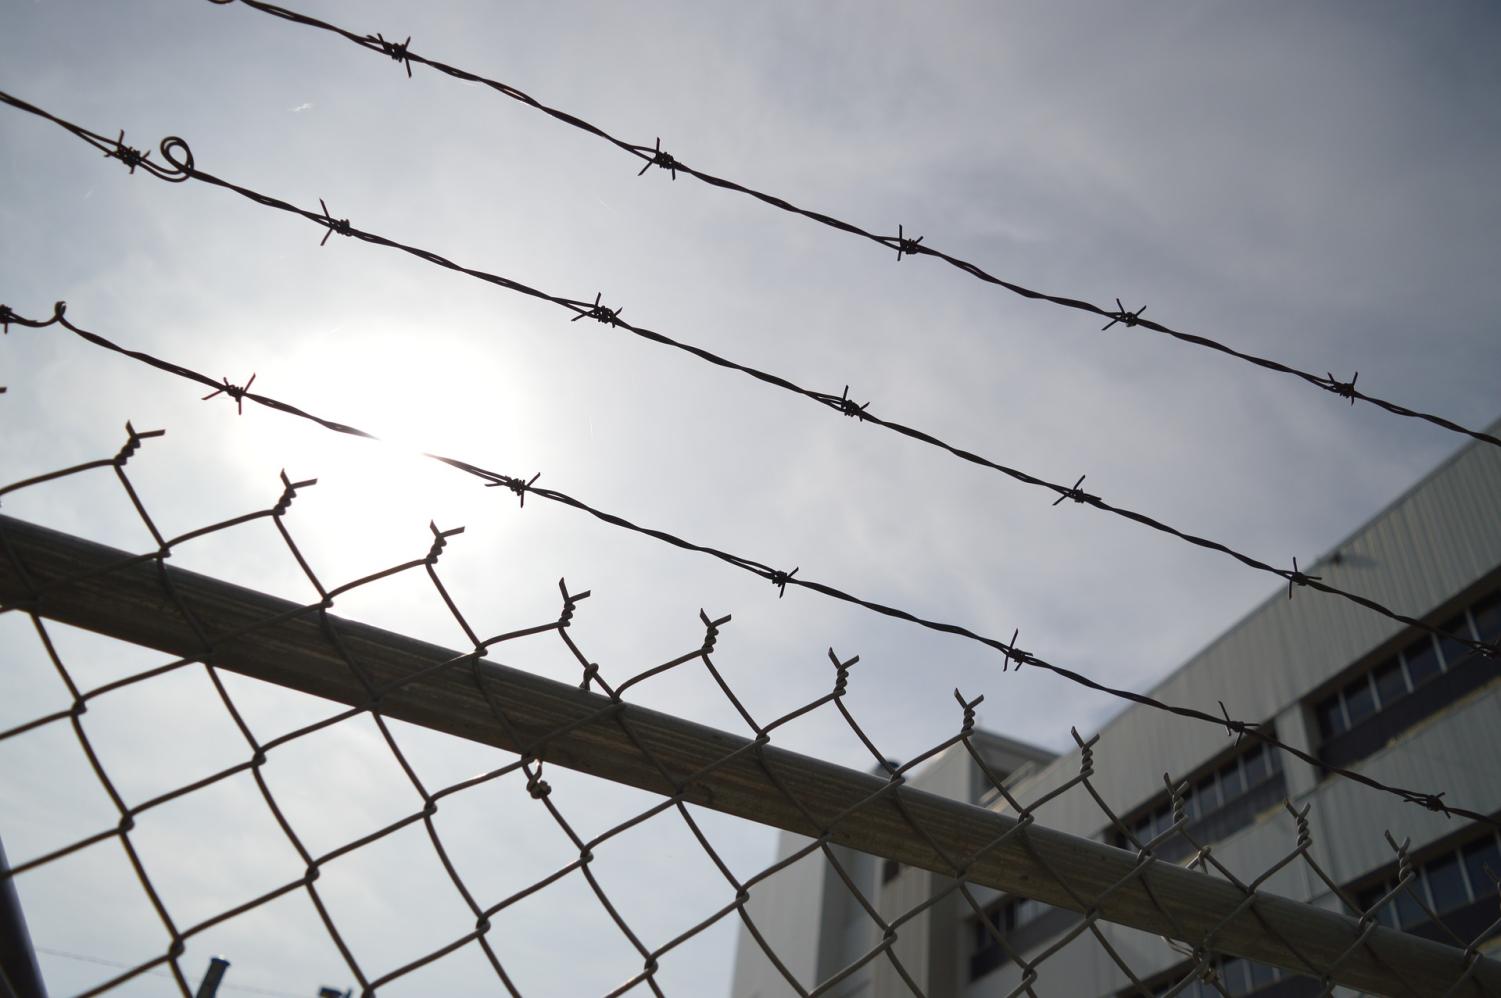 The for-profit prison system has been barbed with issues since its inception.